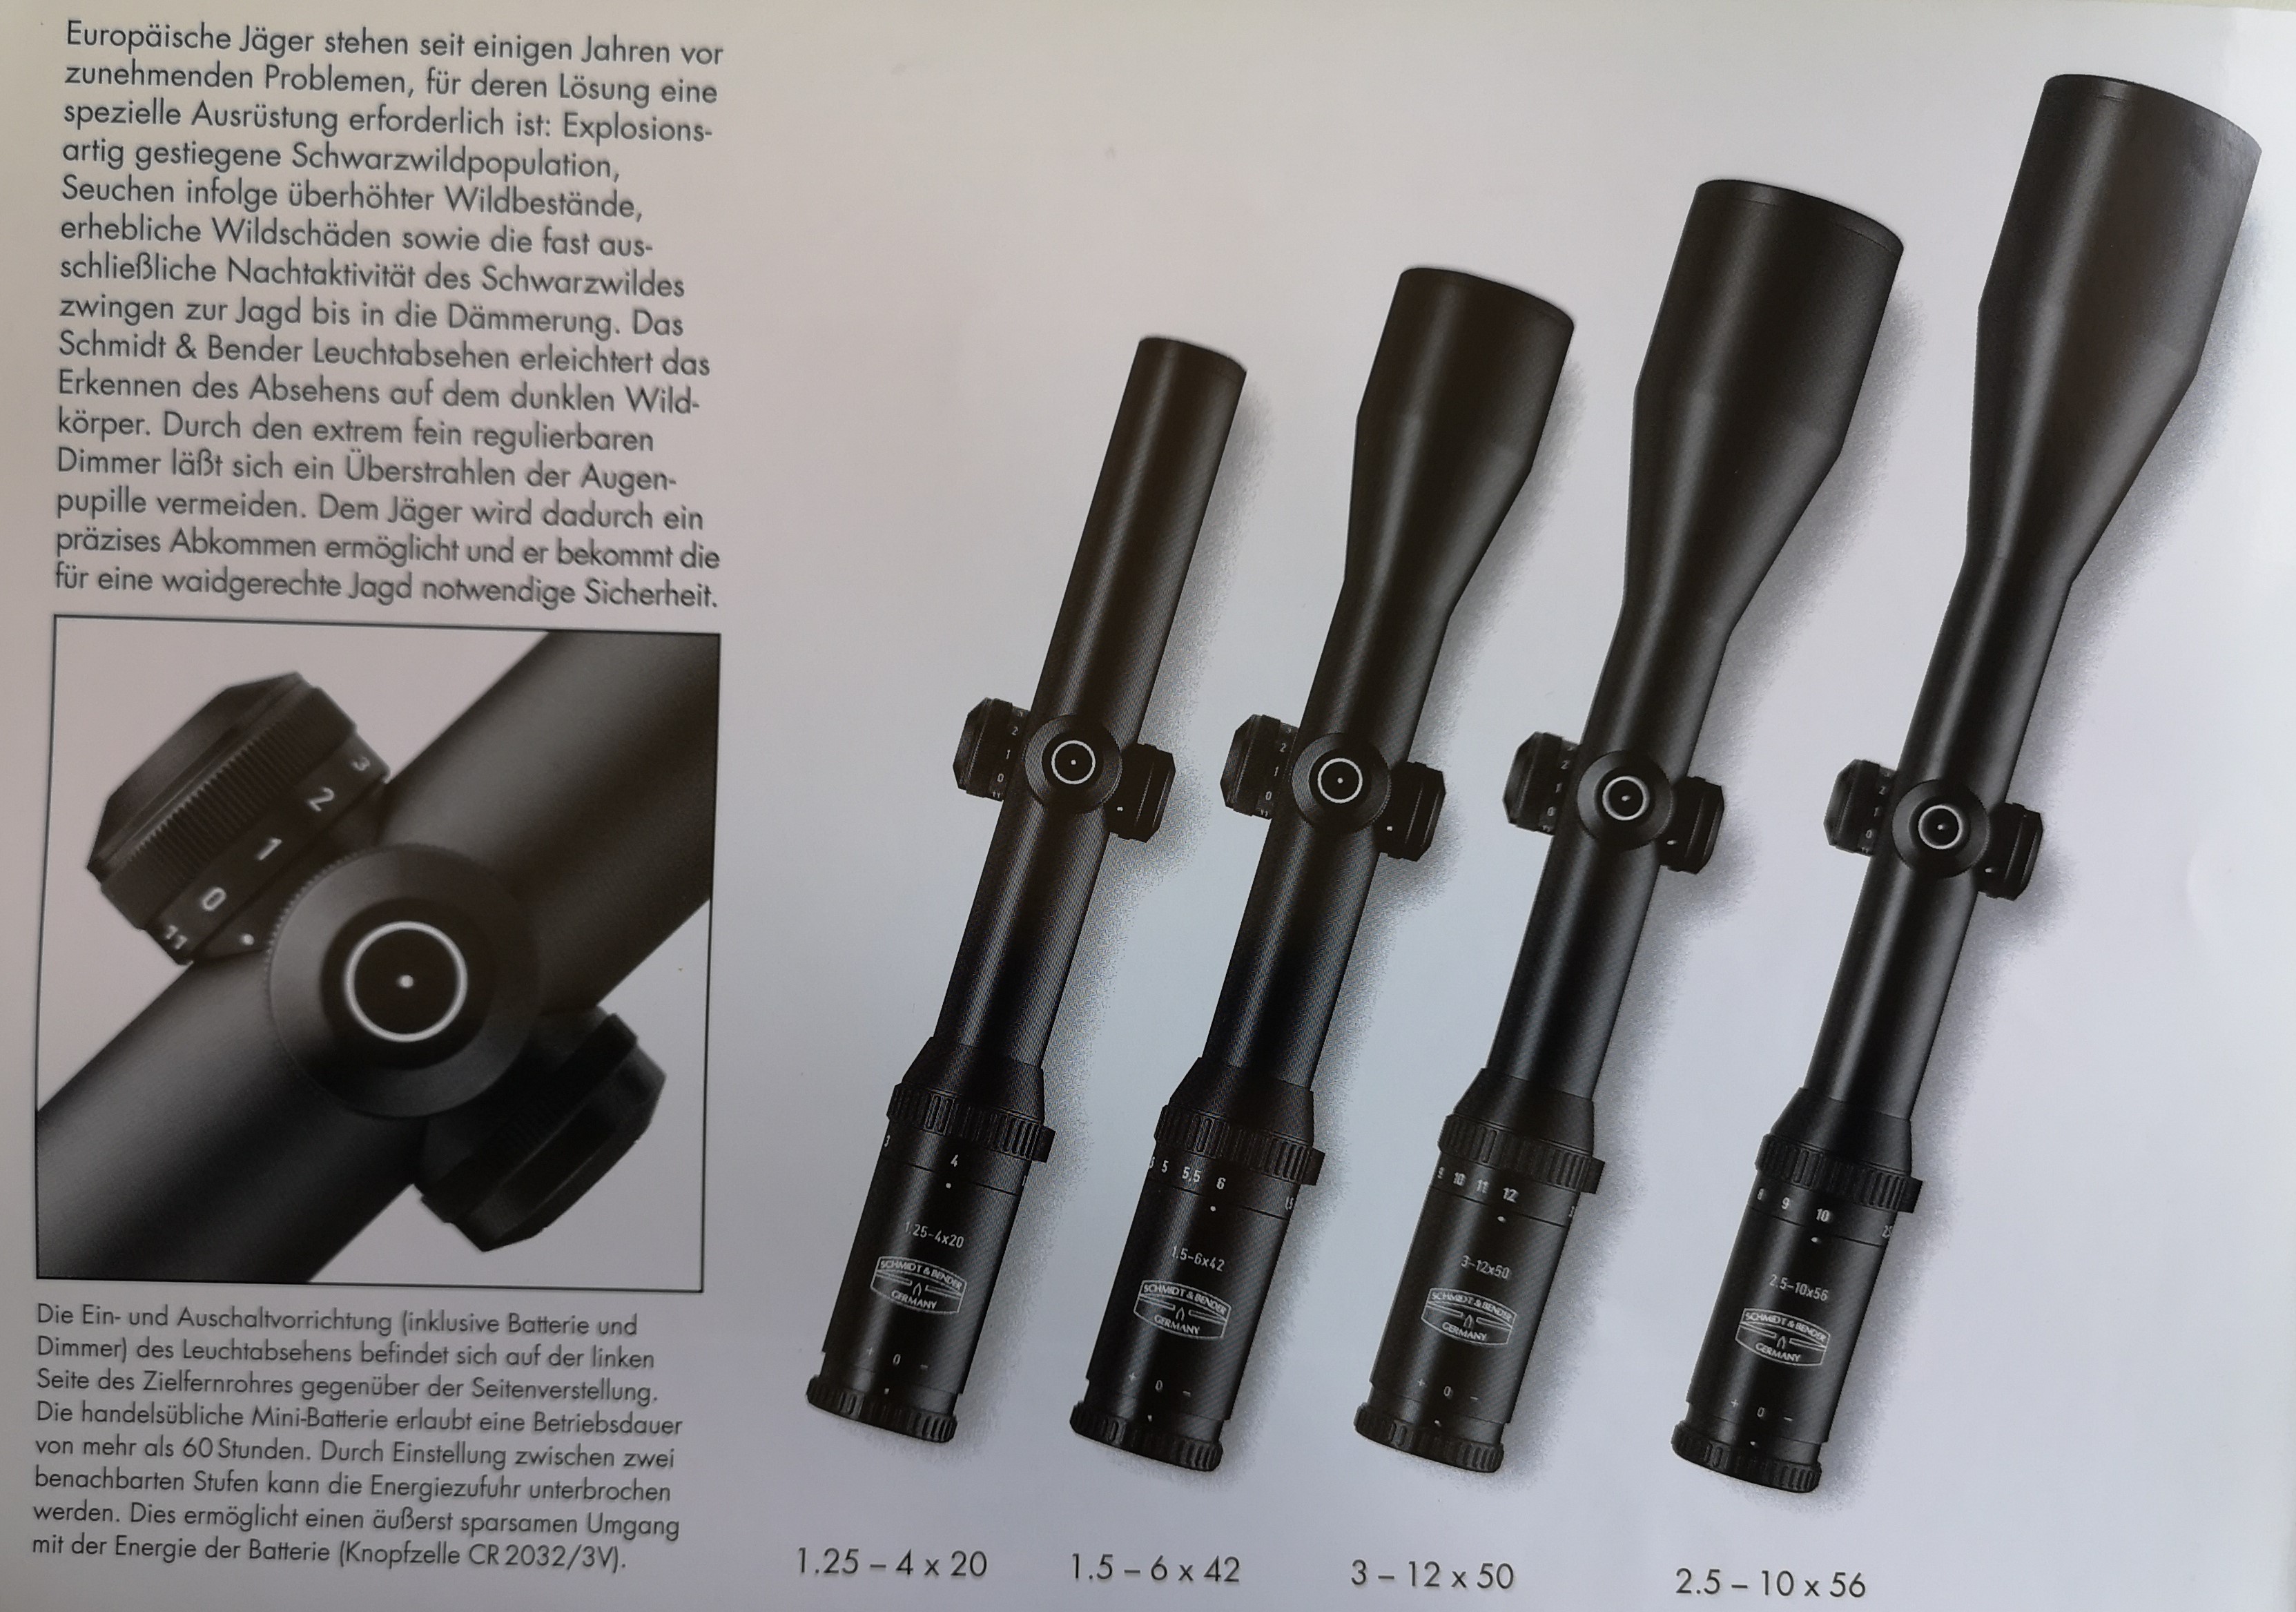 Various riflescopes with illuminated reticles